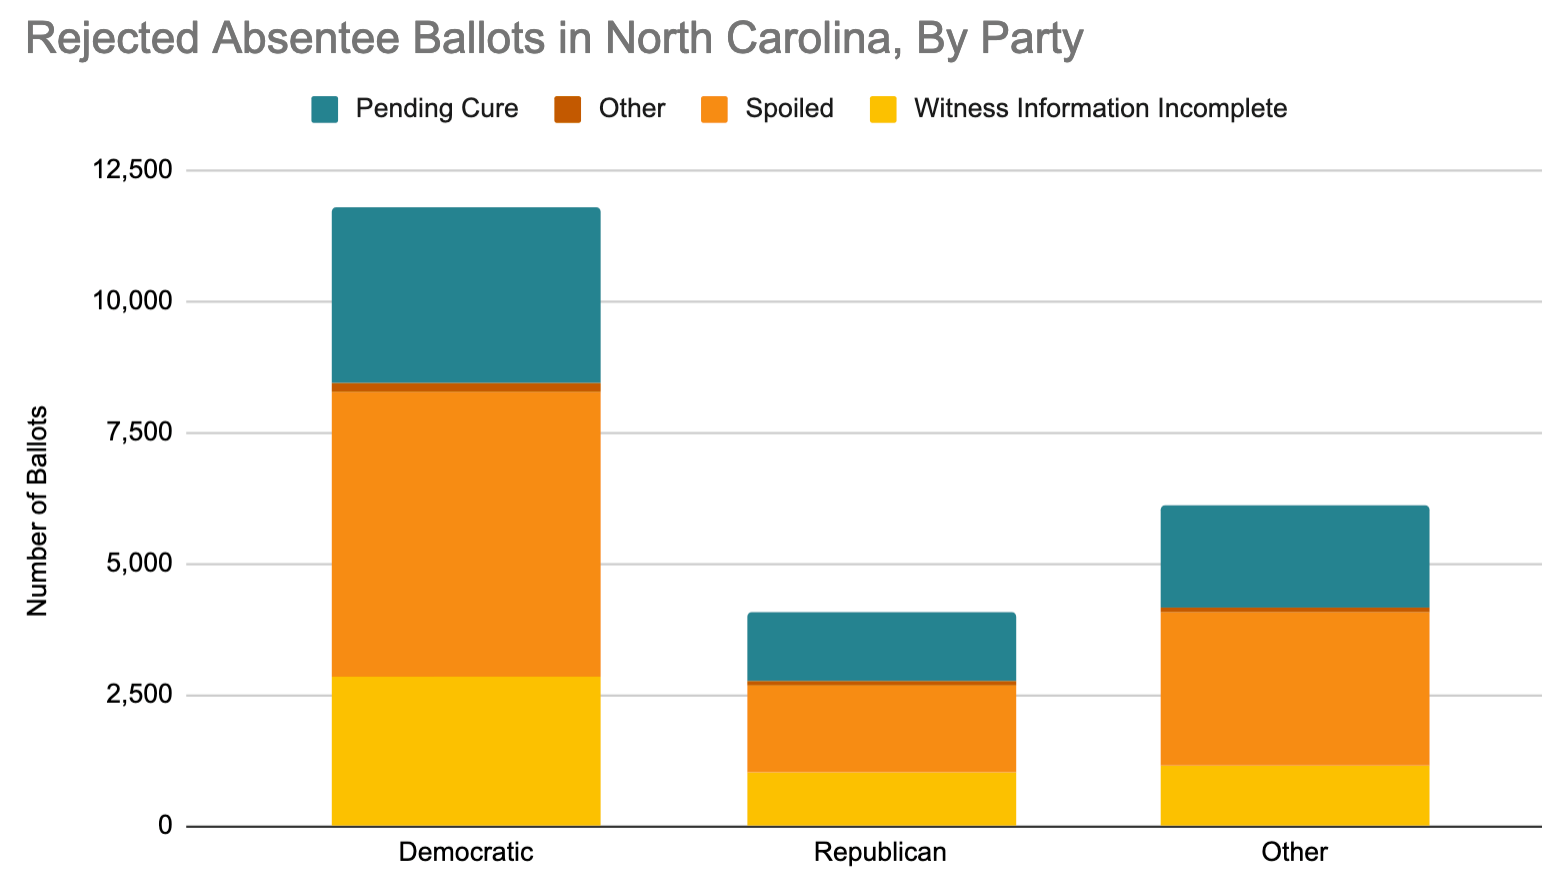 Rejected Absentee Ballots in North Carolina by Party